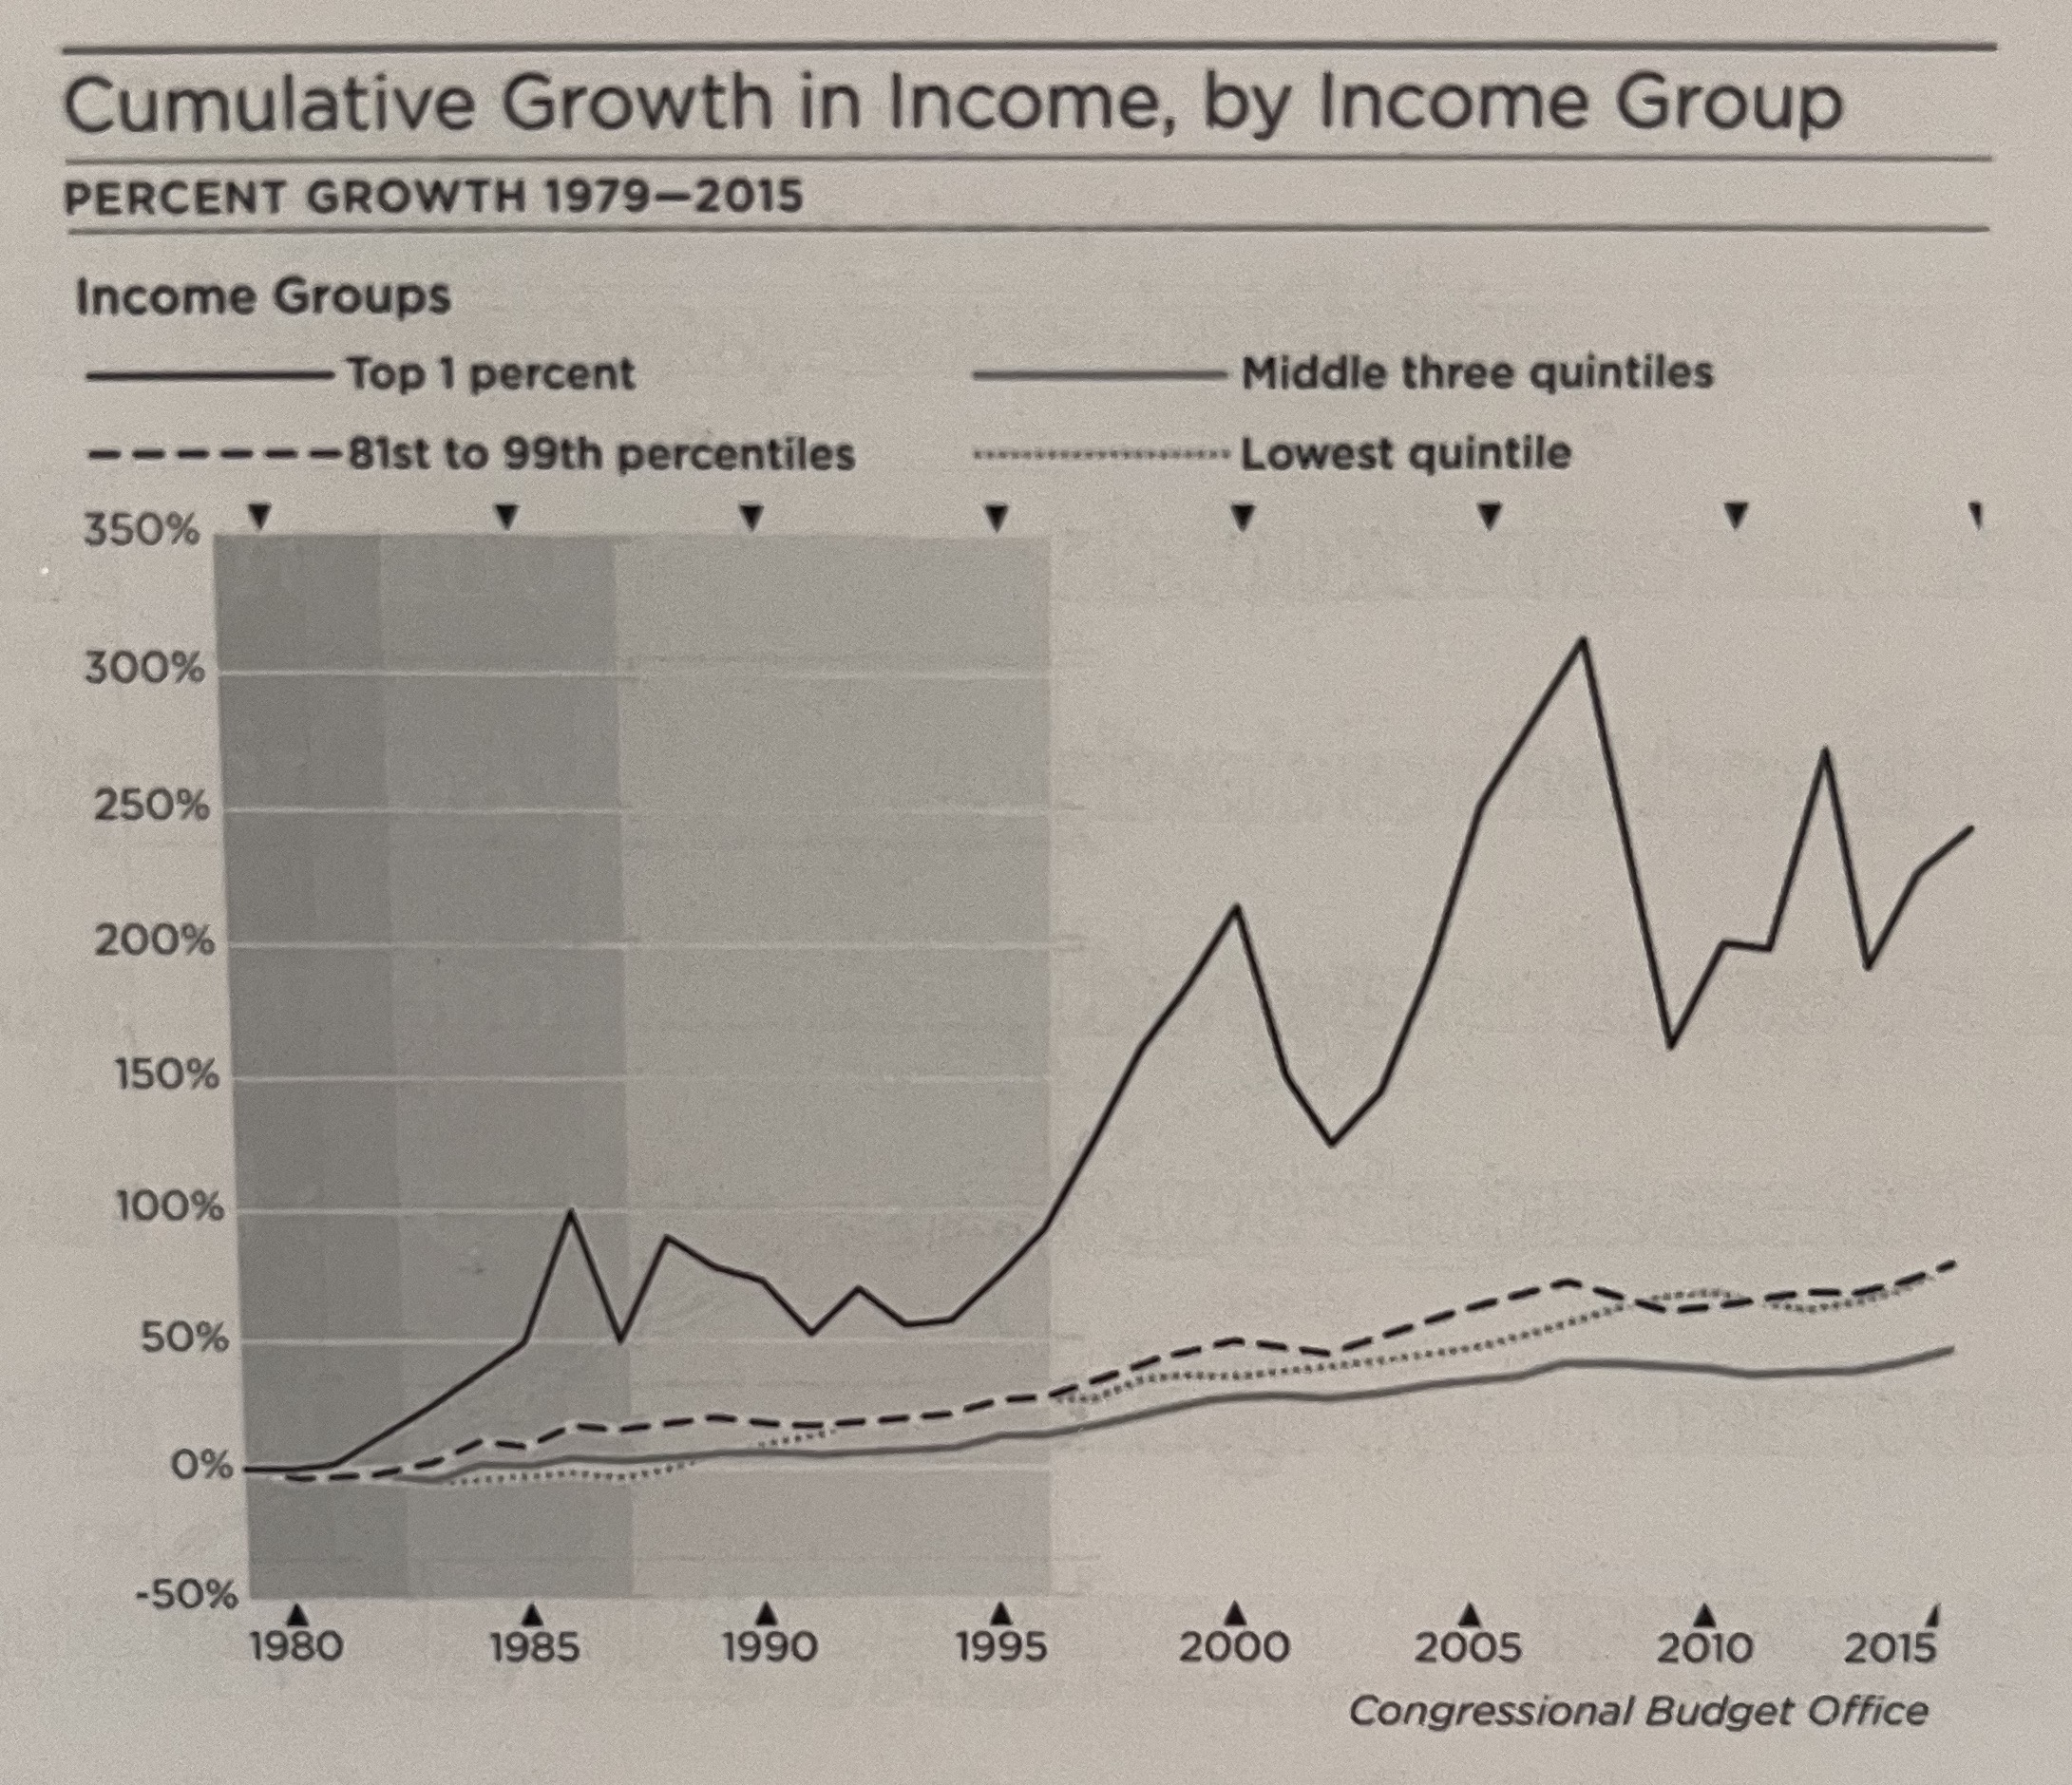 Cumulative Growth in Income, by Income Group